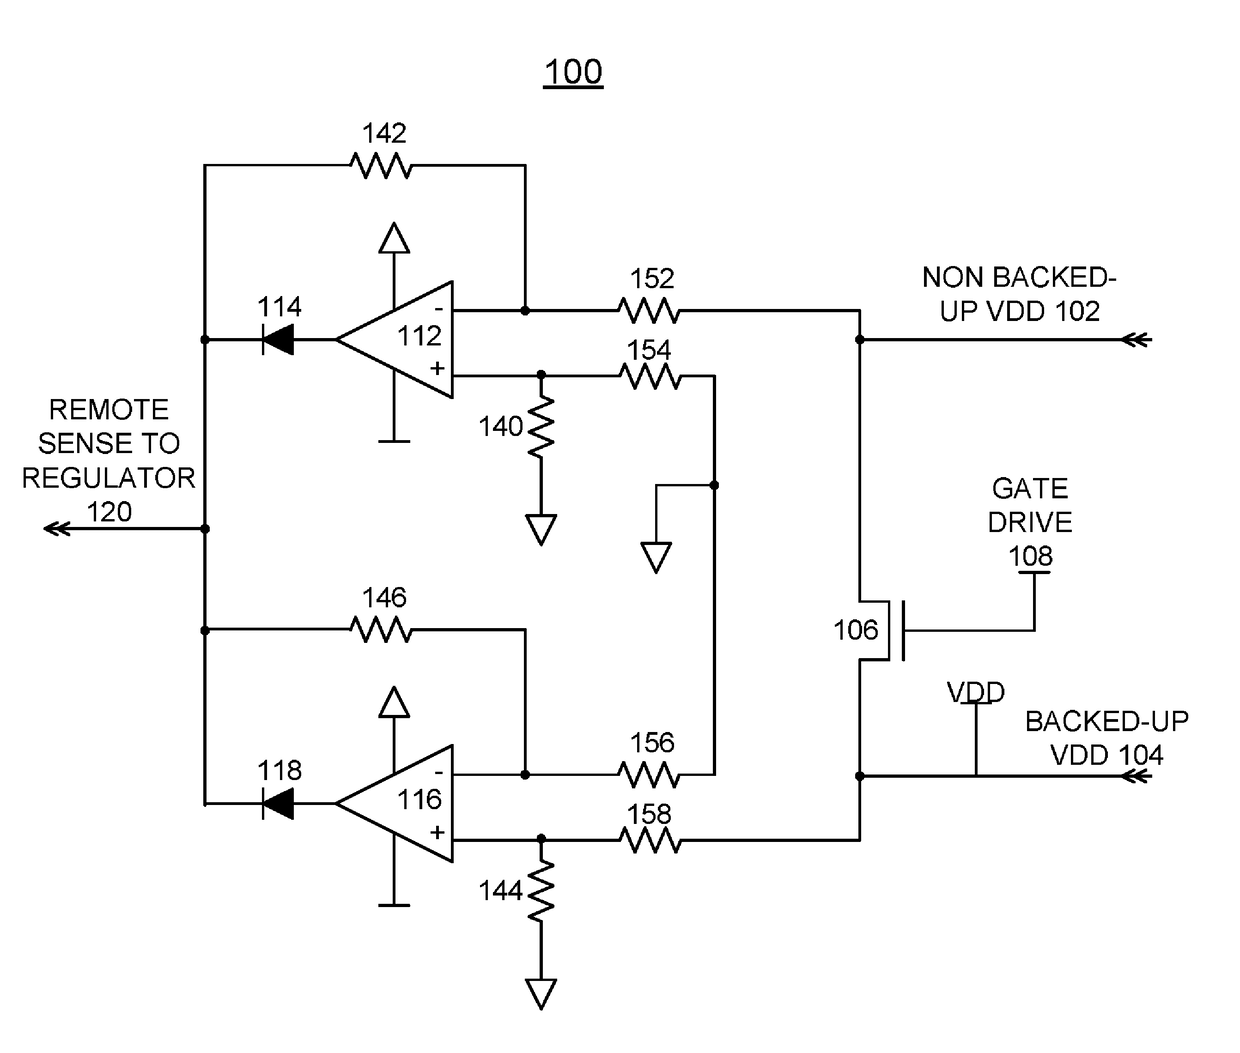 Implementing voltage sense point switching for regulators